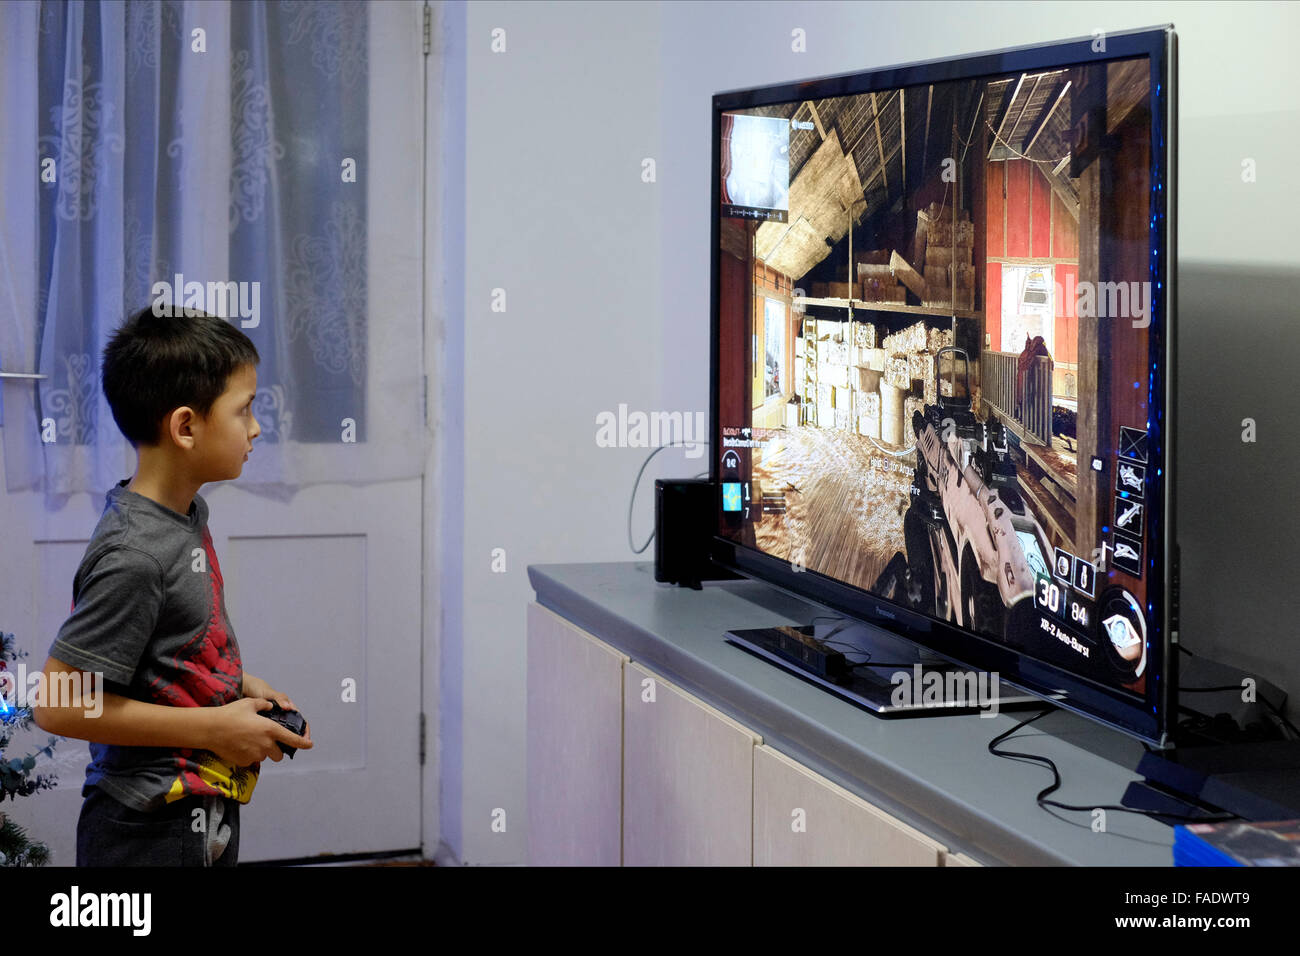 Young Boy Playing Video Game On Big Flat Screen Tv In England Uk Stock Photo Alamy